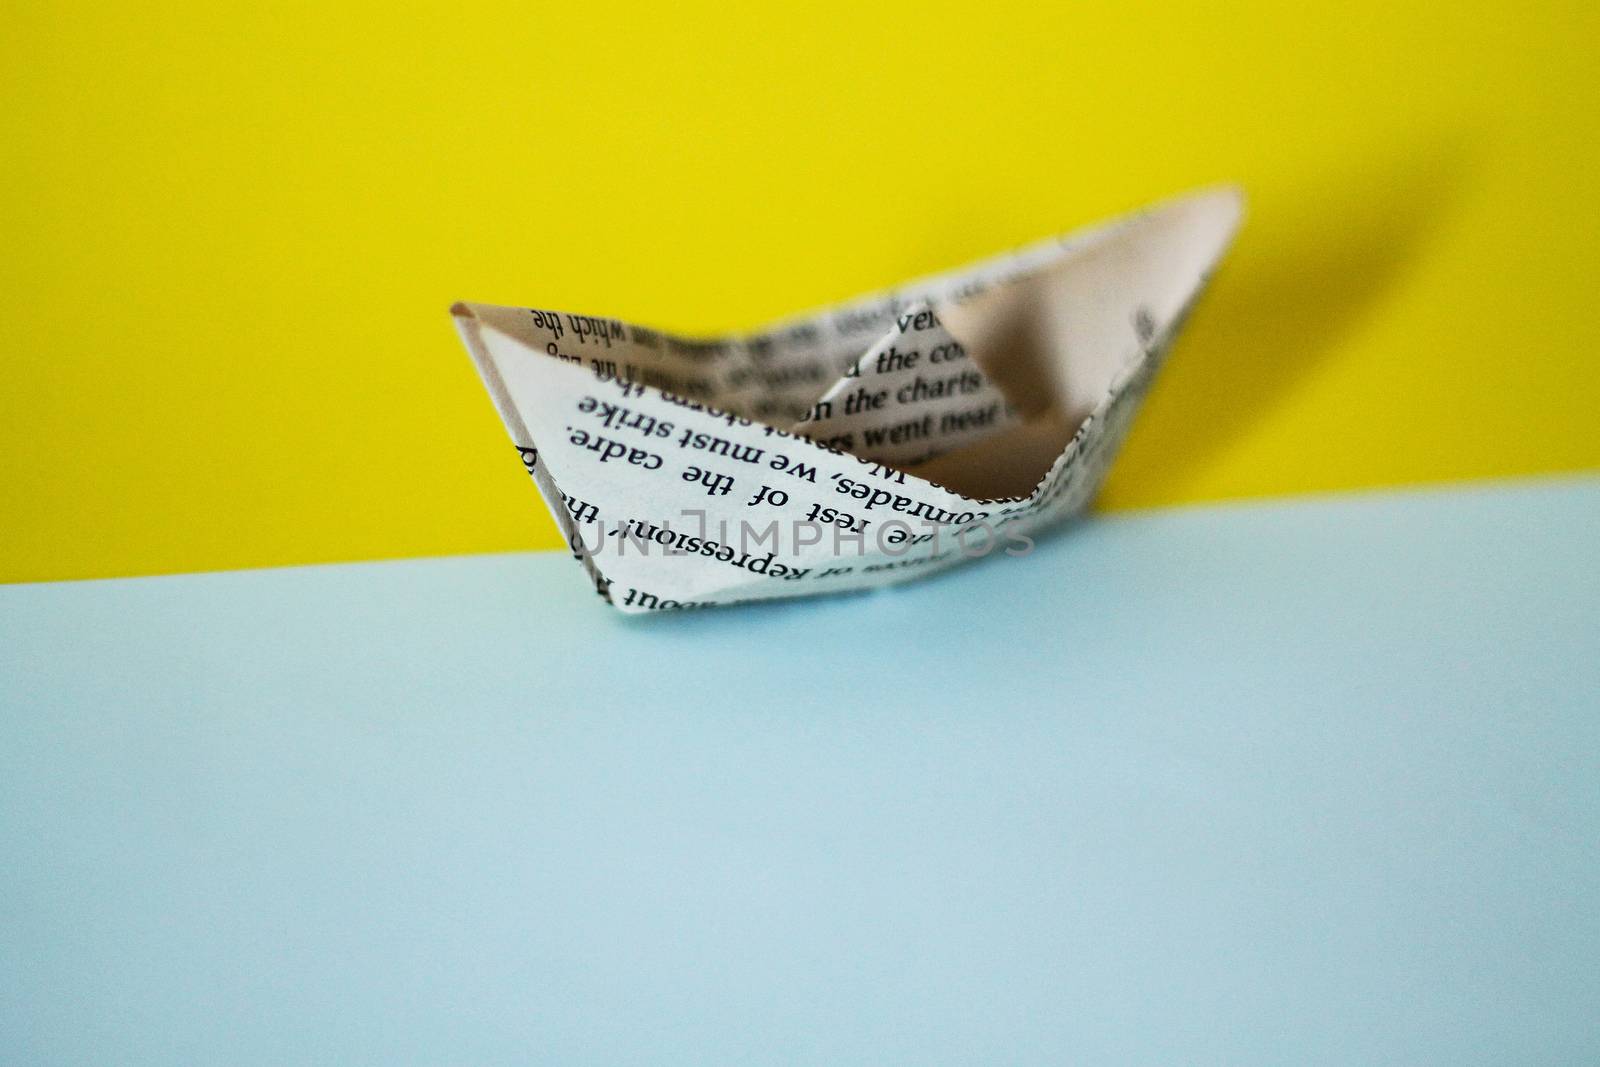 A paper boat made from old newspaper by Sonnet15